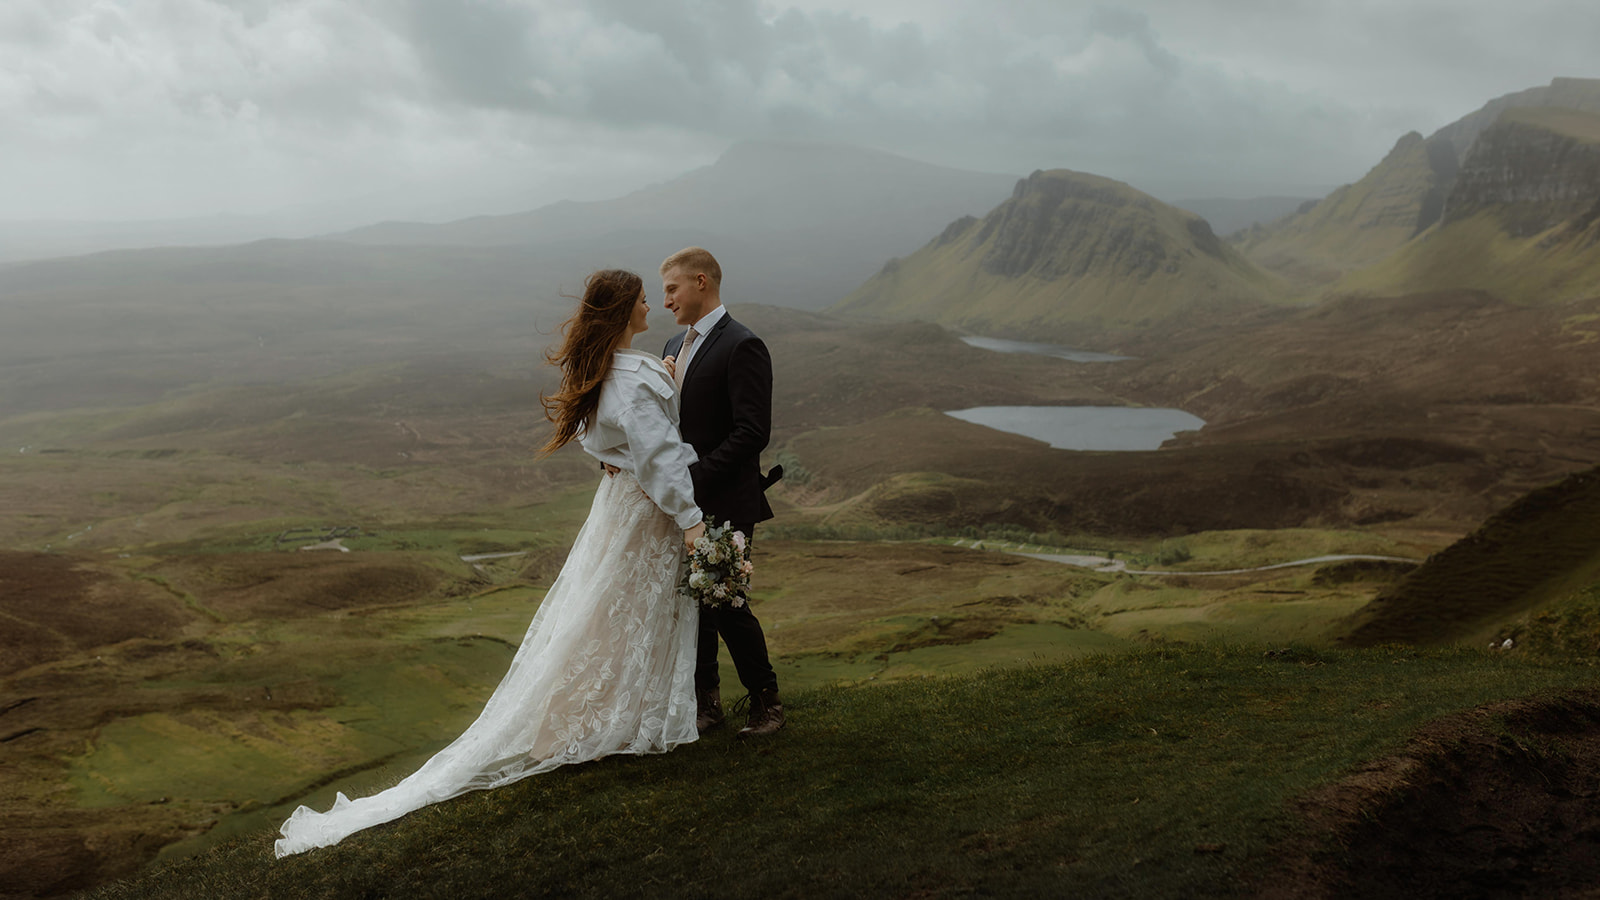 Emma and Matthew looking lovingly at each other on the Isle of Skye during their elopement day